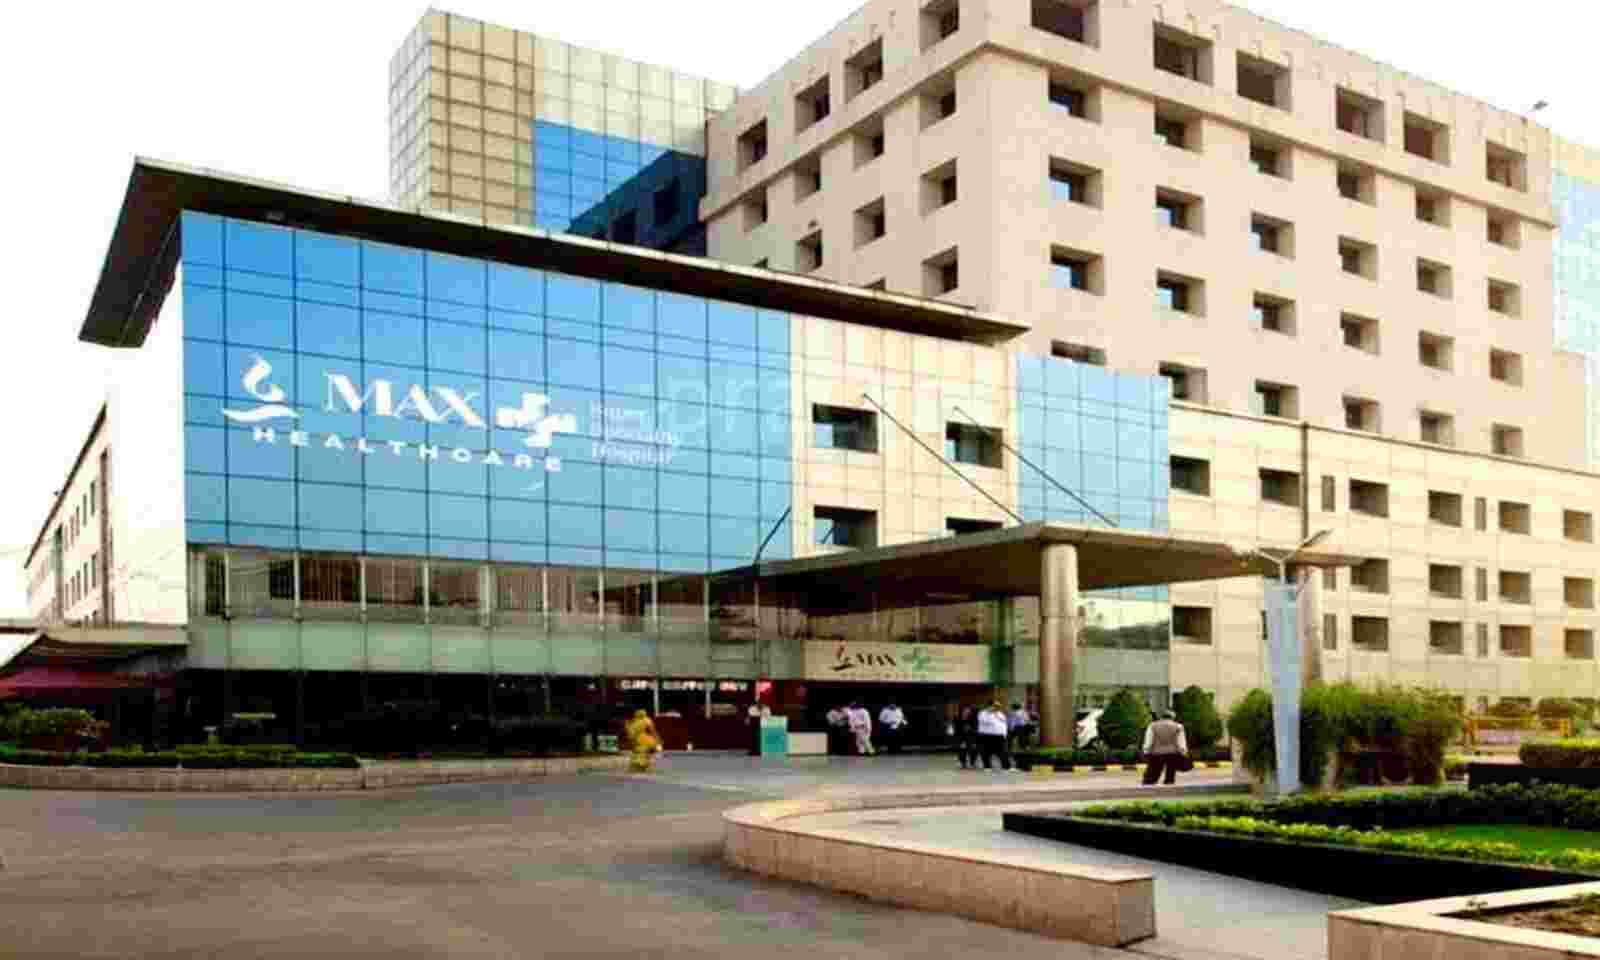 max vaishali hospital sealed after oncologist tests corona positive, movement of doctors, staff restricted